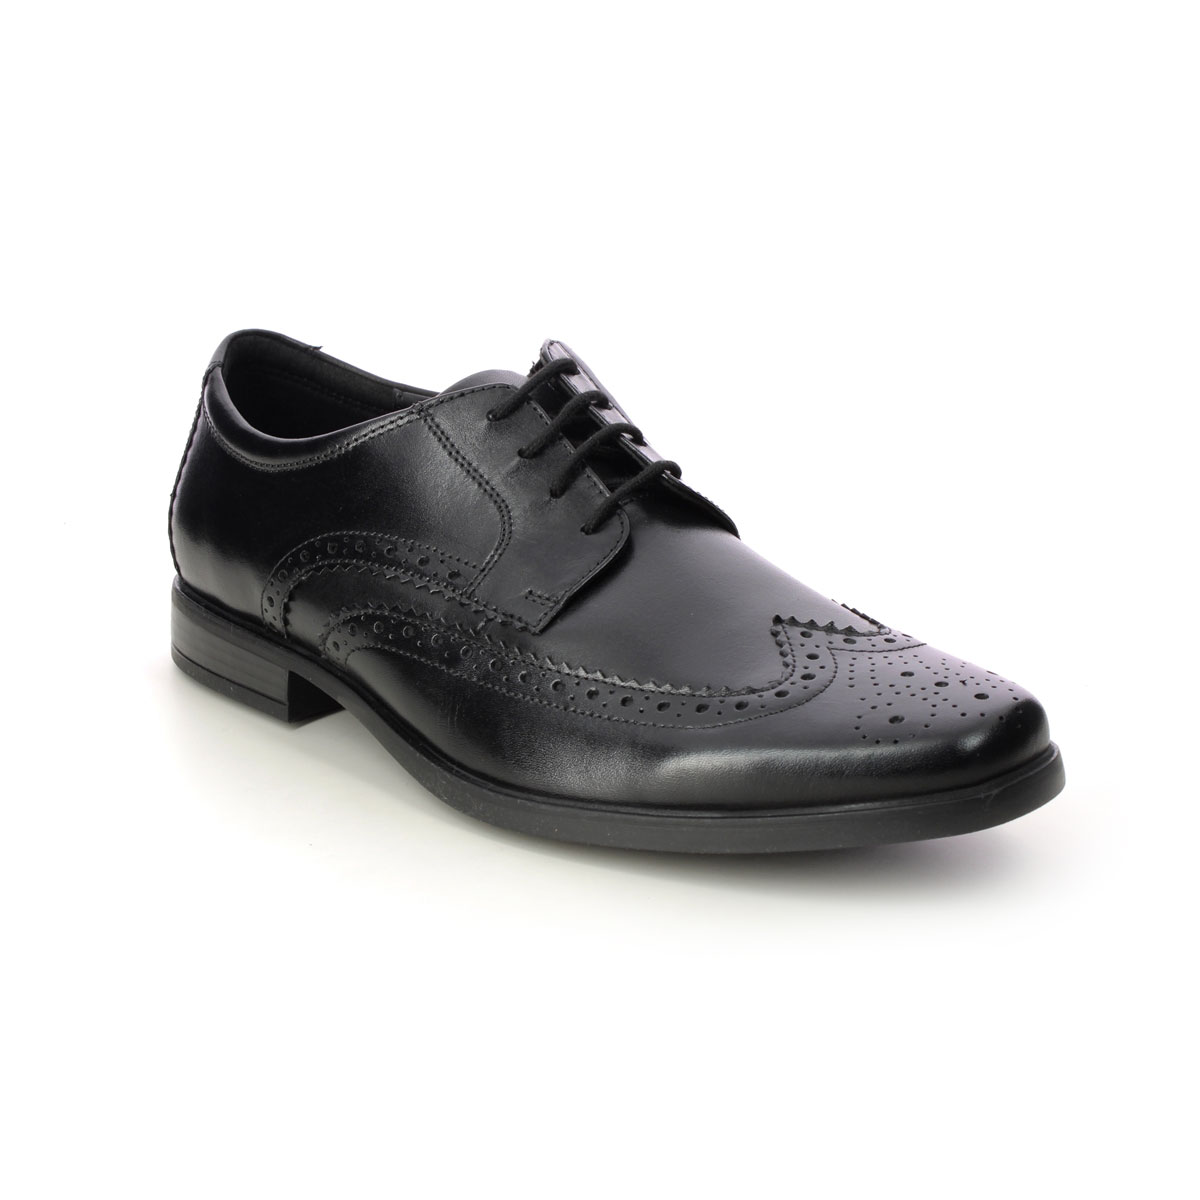 Clarks Howard Wing Black Leather Mens Brogues 612537G In Size 6 In Plain Black Leather G Width Fitting